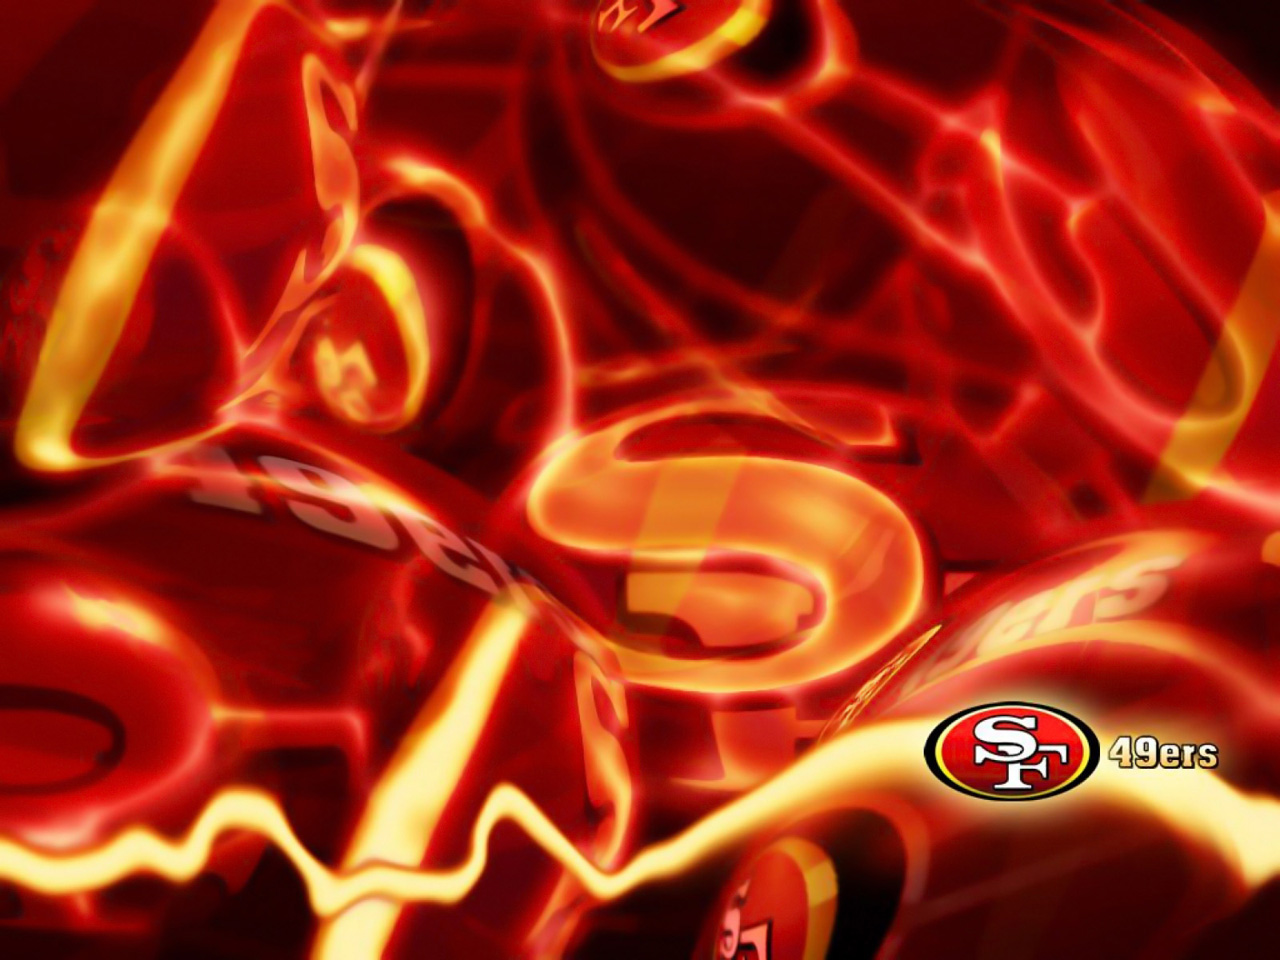  Francisco 49ers wallpaper background San Francisco 49ers wallpapers